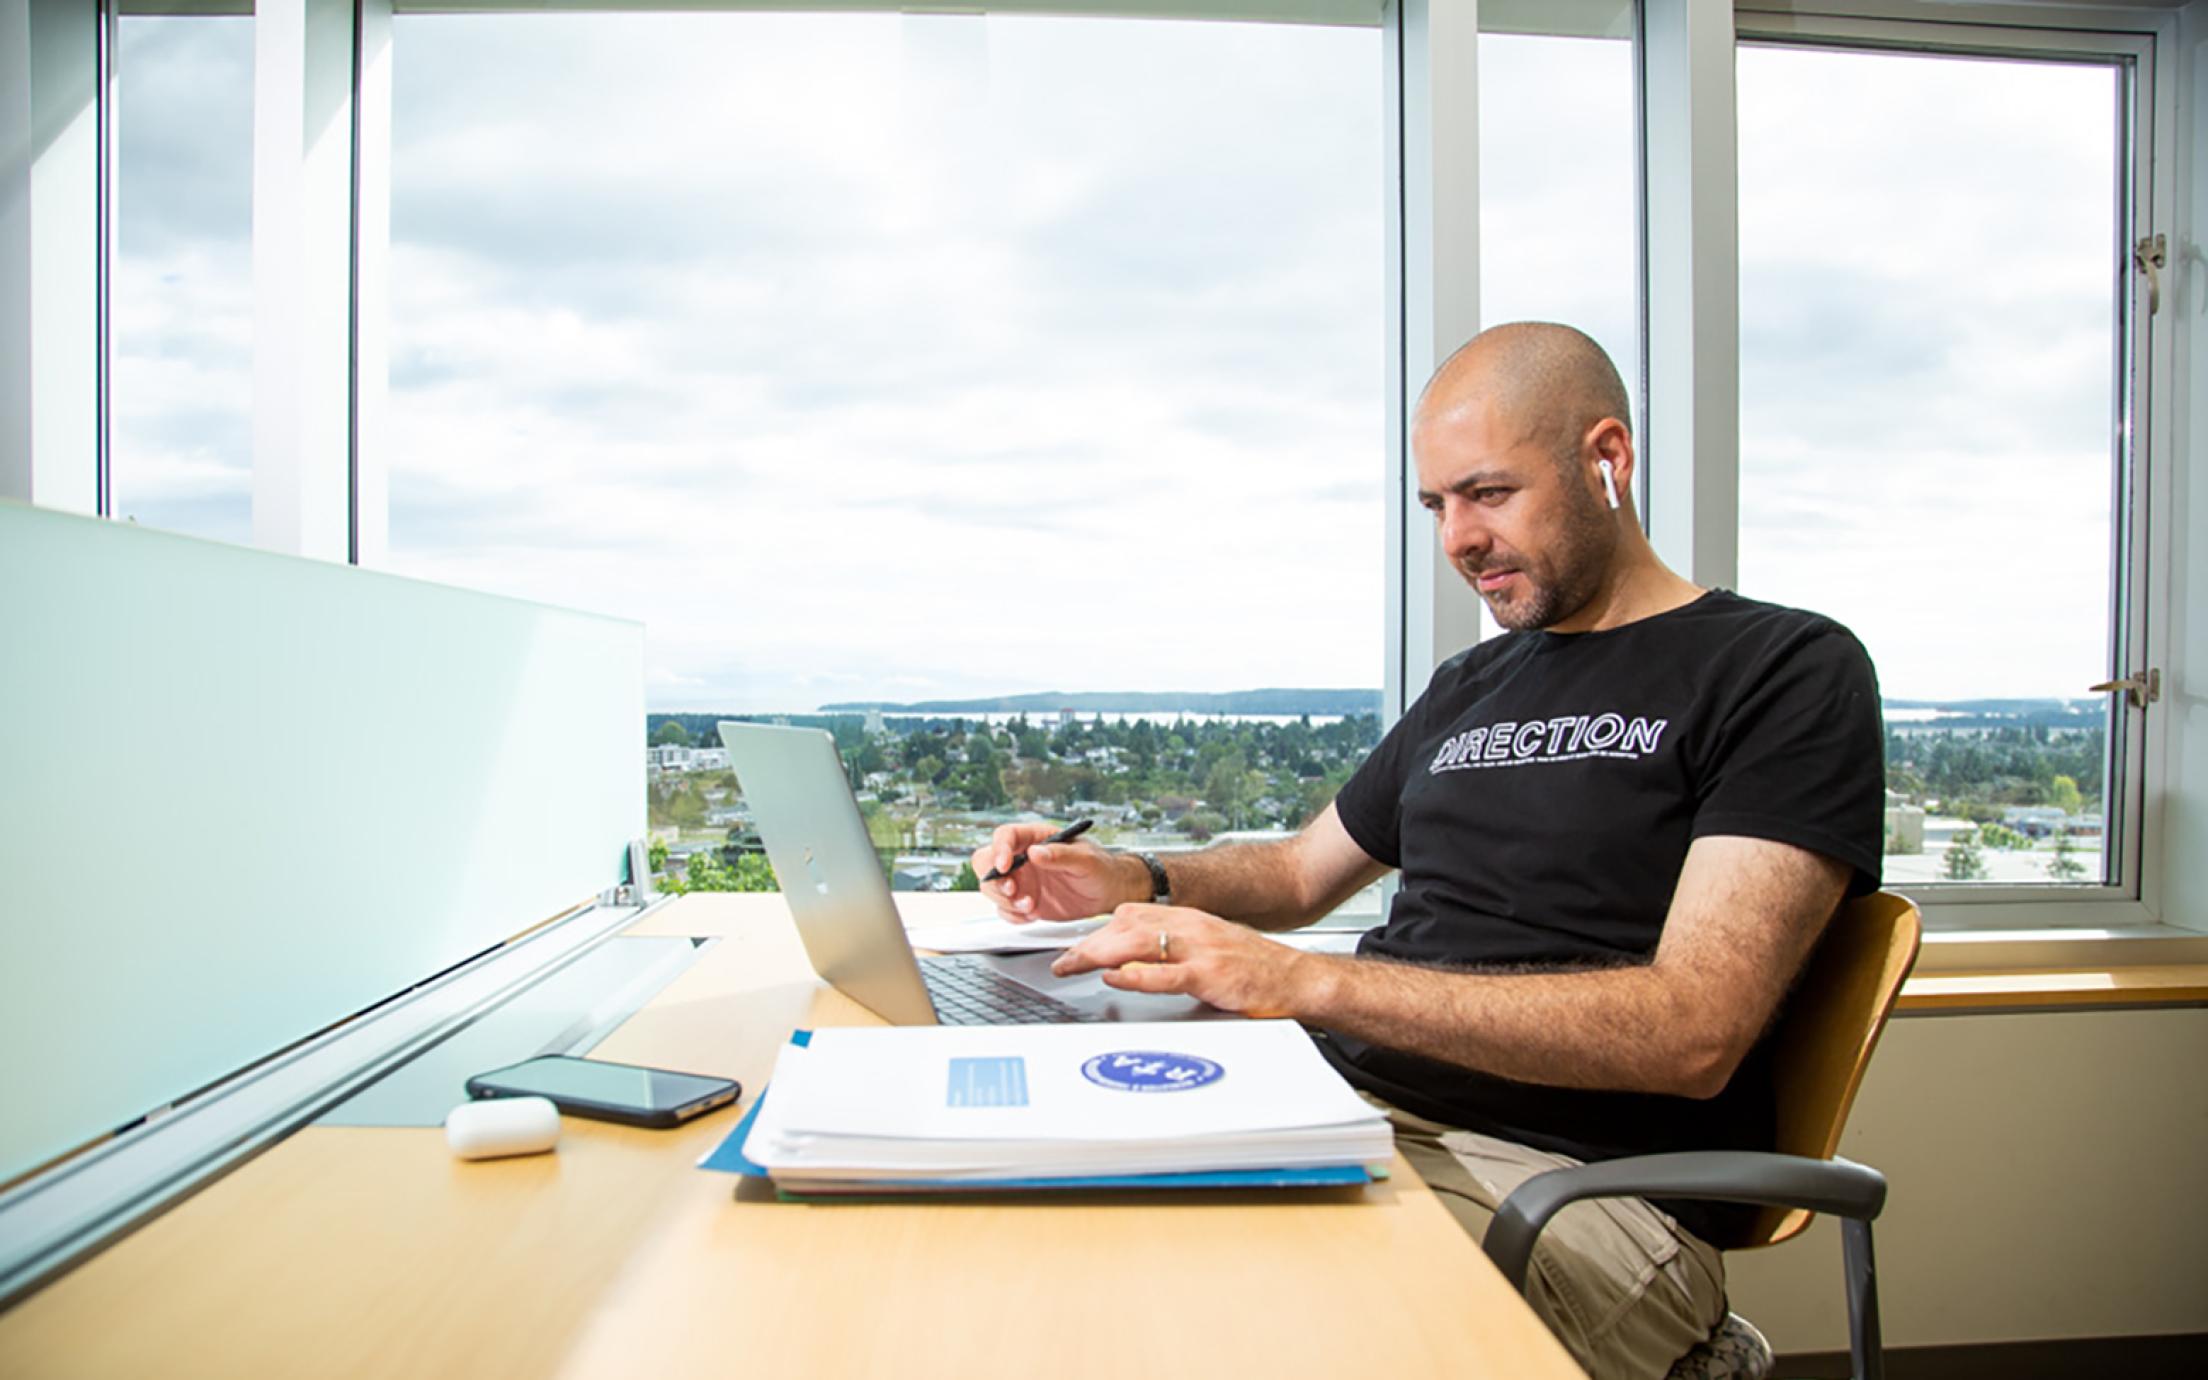 Student studies at a desk in the library with a view of the City of Nanaimo in the background